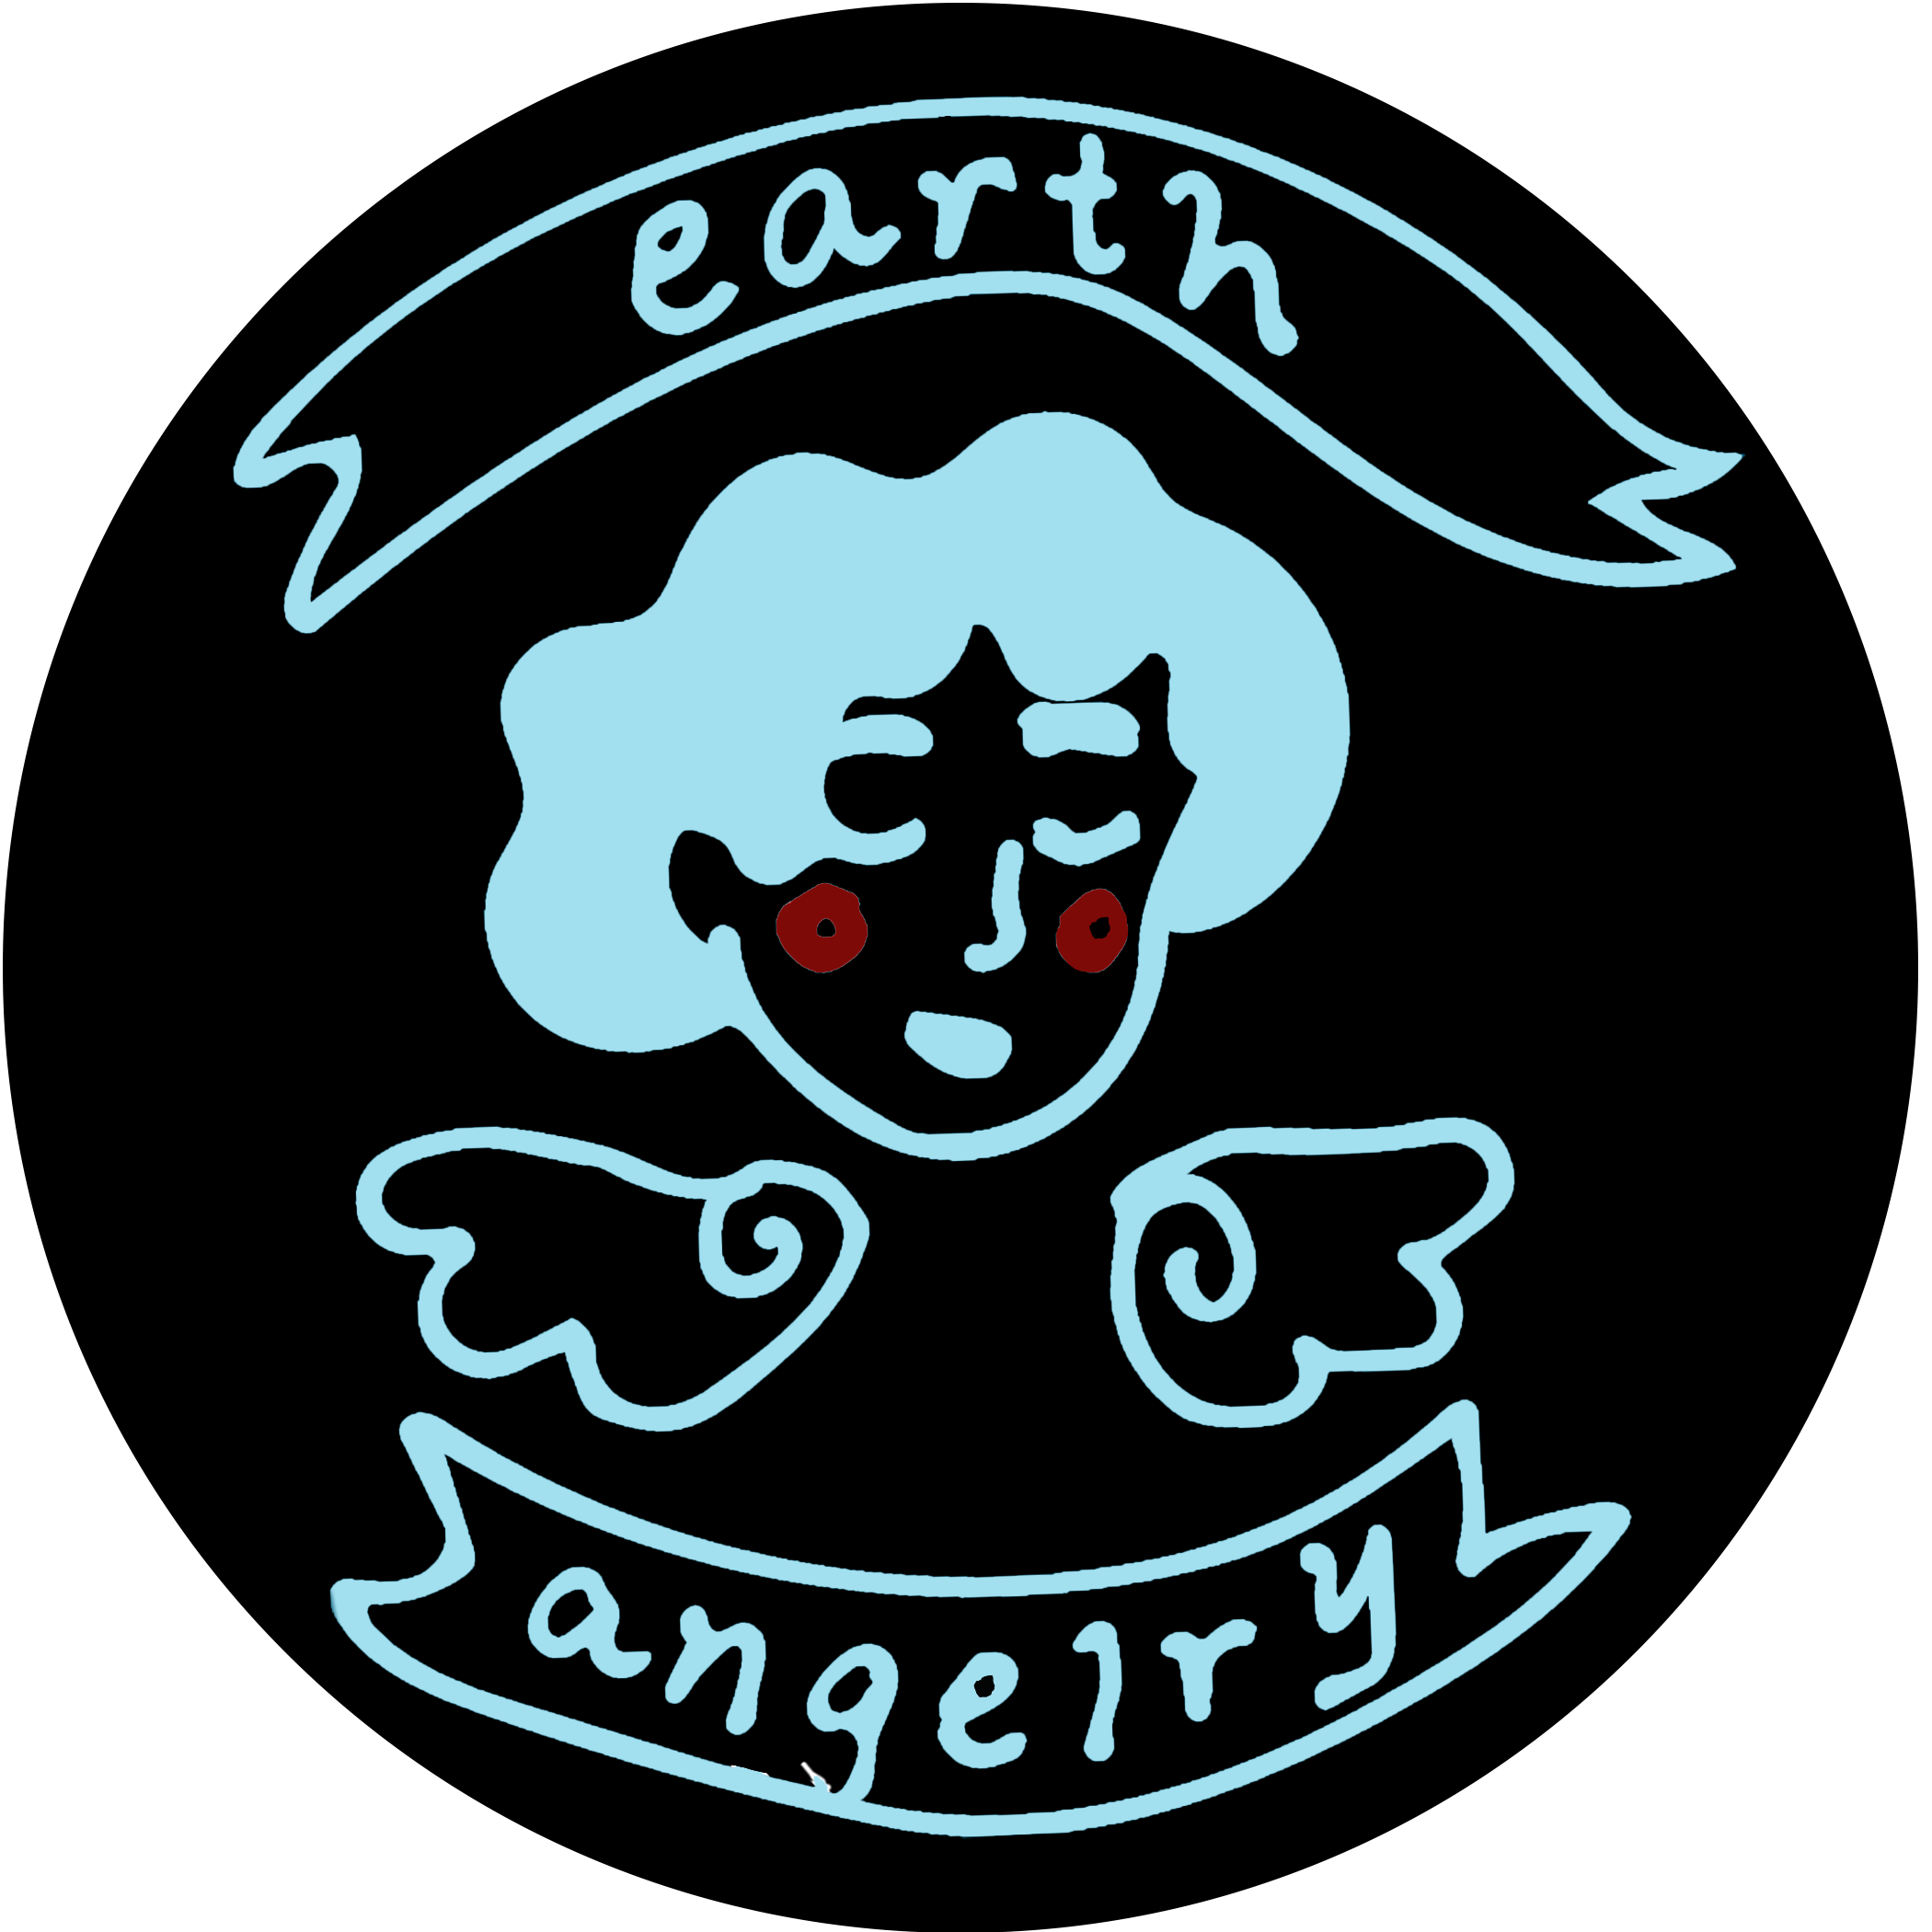 Earth Angelry